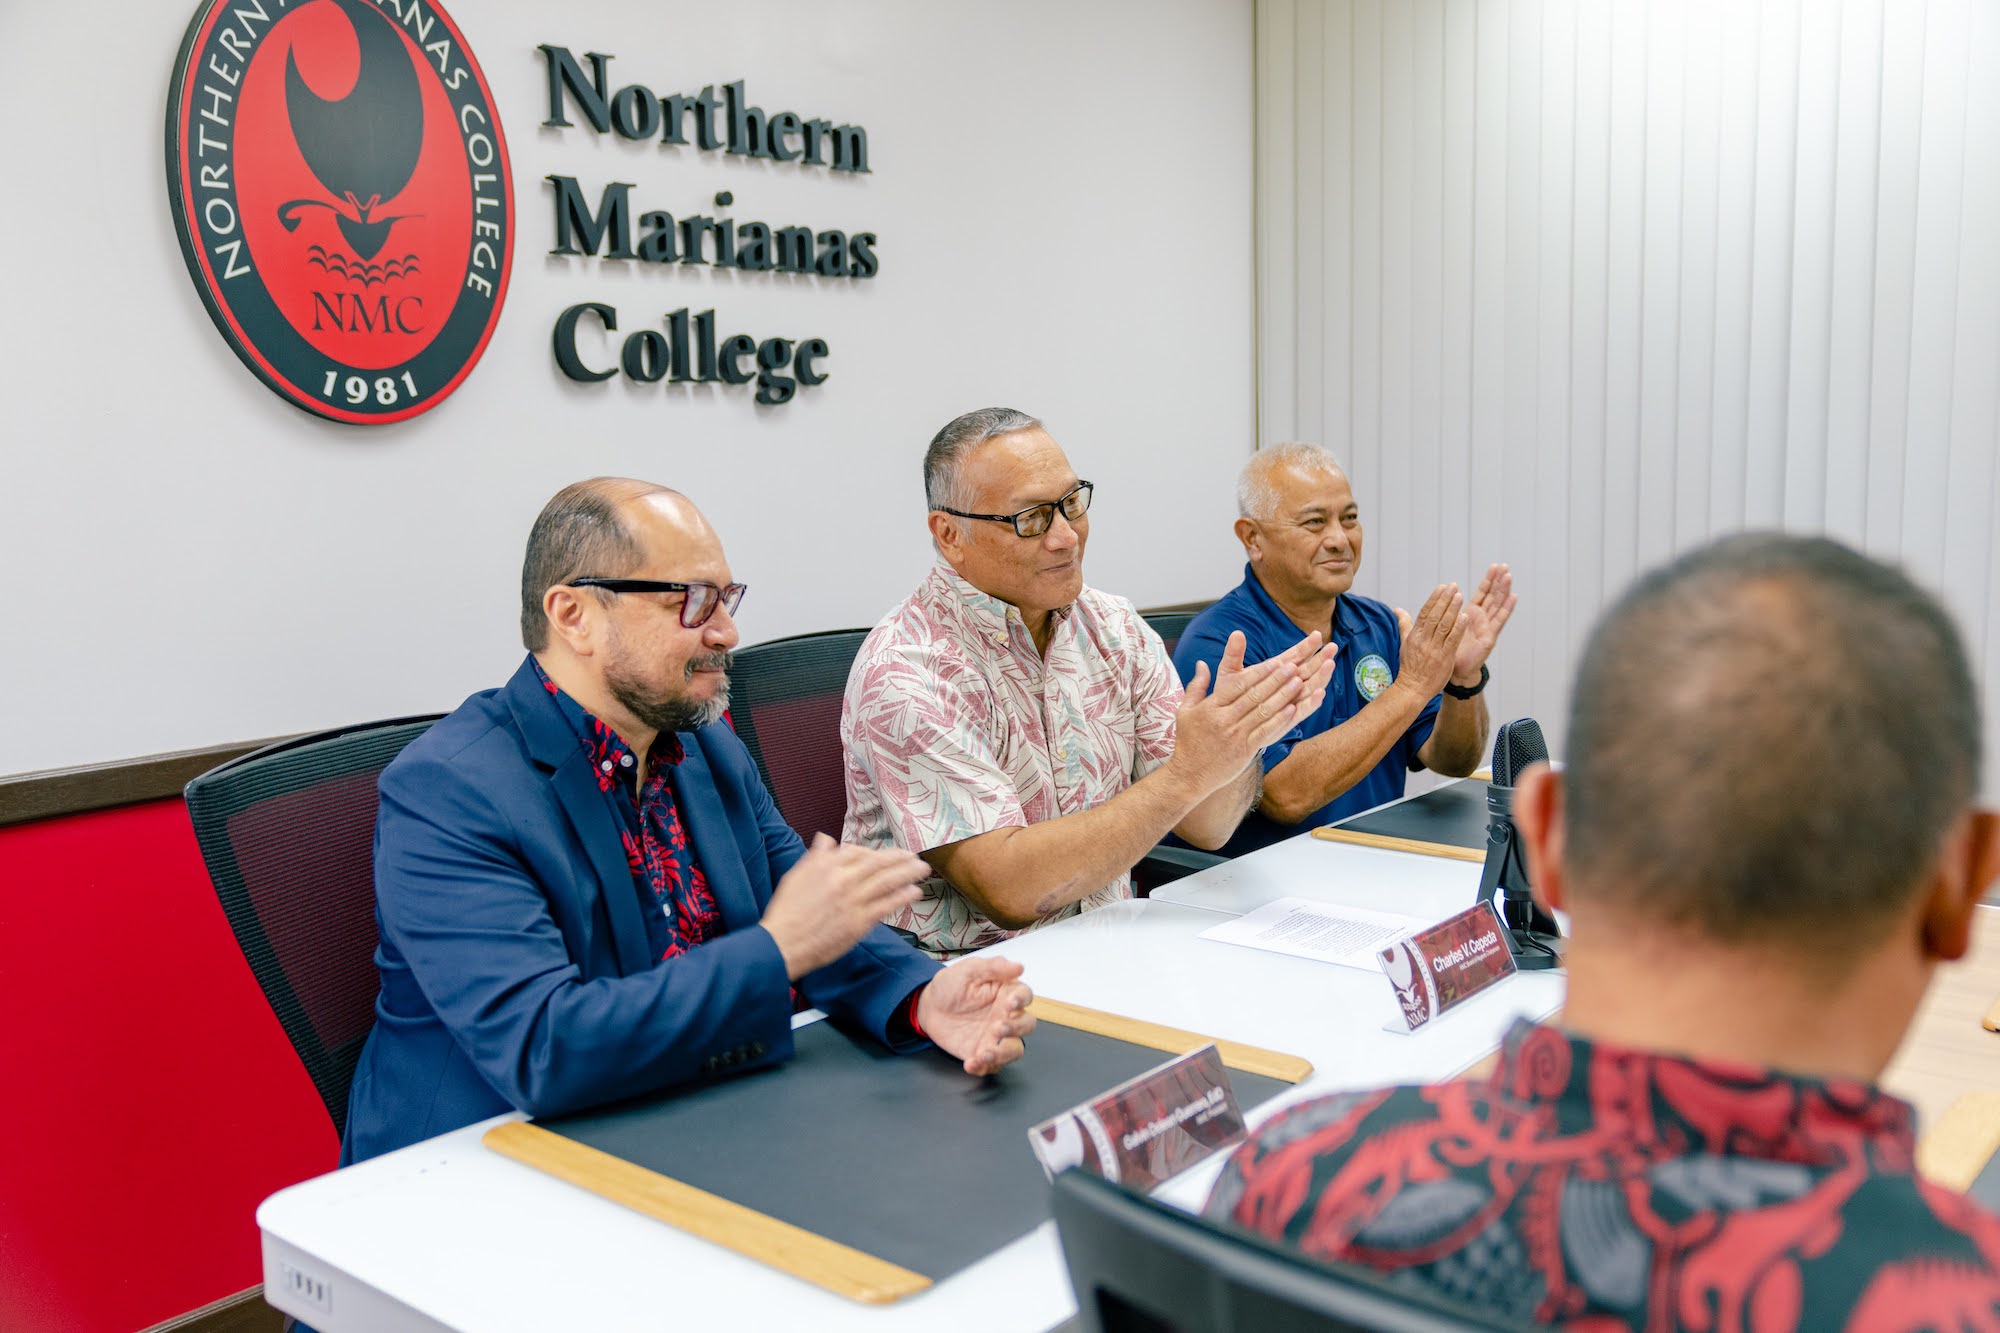 Northern Marianas College President Dr. Galvin S. Deleon Guerrero, left, shakes hands with NMC Board of Regents Chairman Charles V. Cepeda, center, as NMC Foundation Chairman Vicente Babauta, third right, and other members of the Board of Regents applaud in the NMC Board of Regents conference room on Thursday.